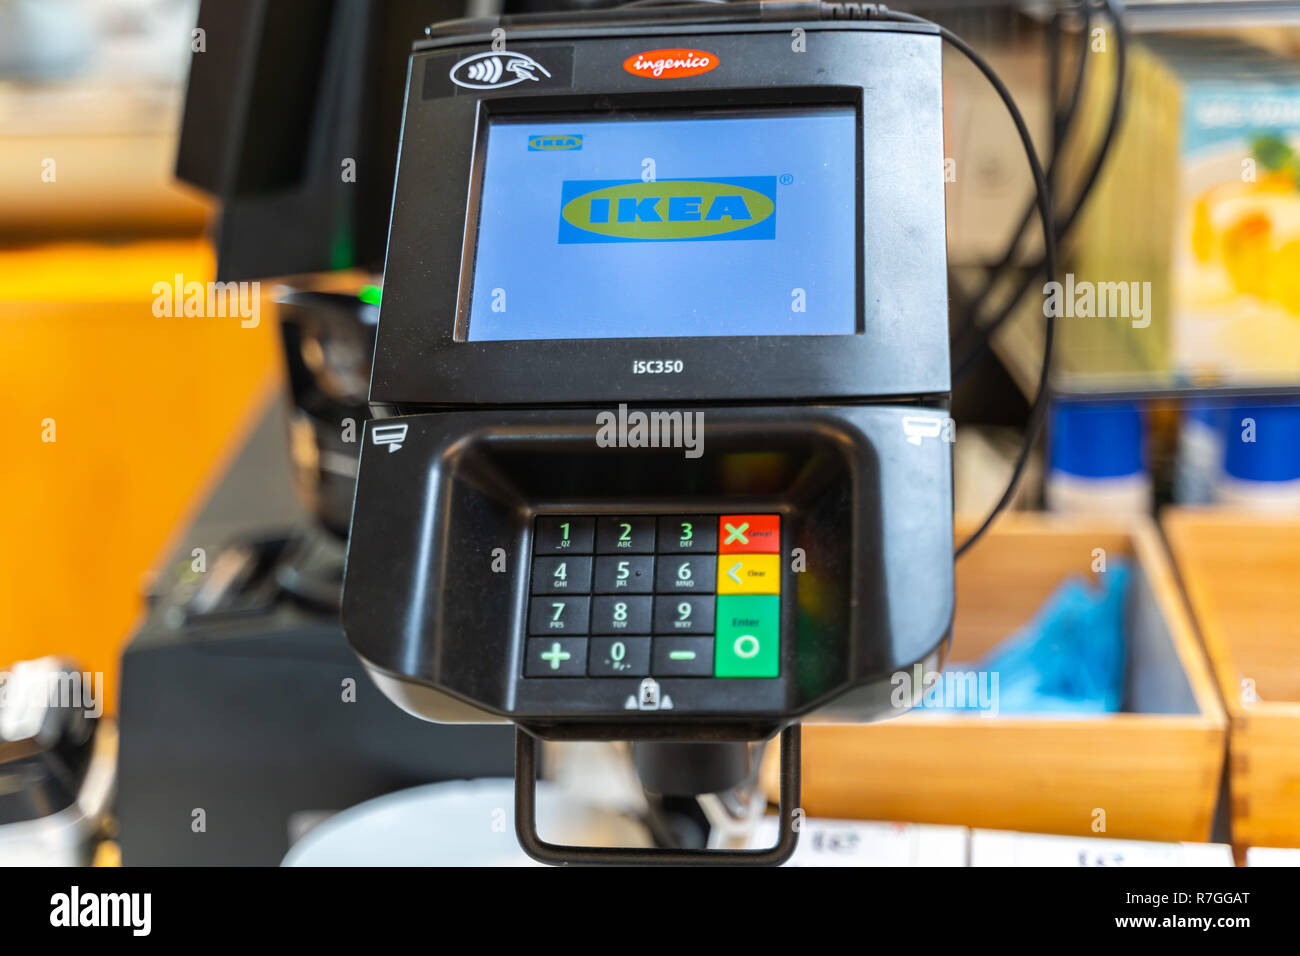 Valencia,Spain - December 09, 2018: Ikea store lot in Alfafar, Valencia. Credit card paymenet terminal (POS Machine) with Ikea name on the screen. Co Stock Photo